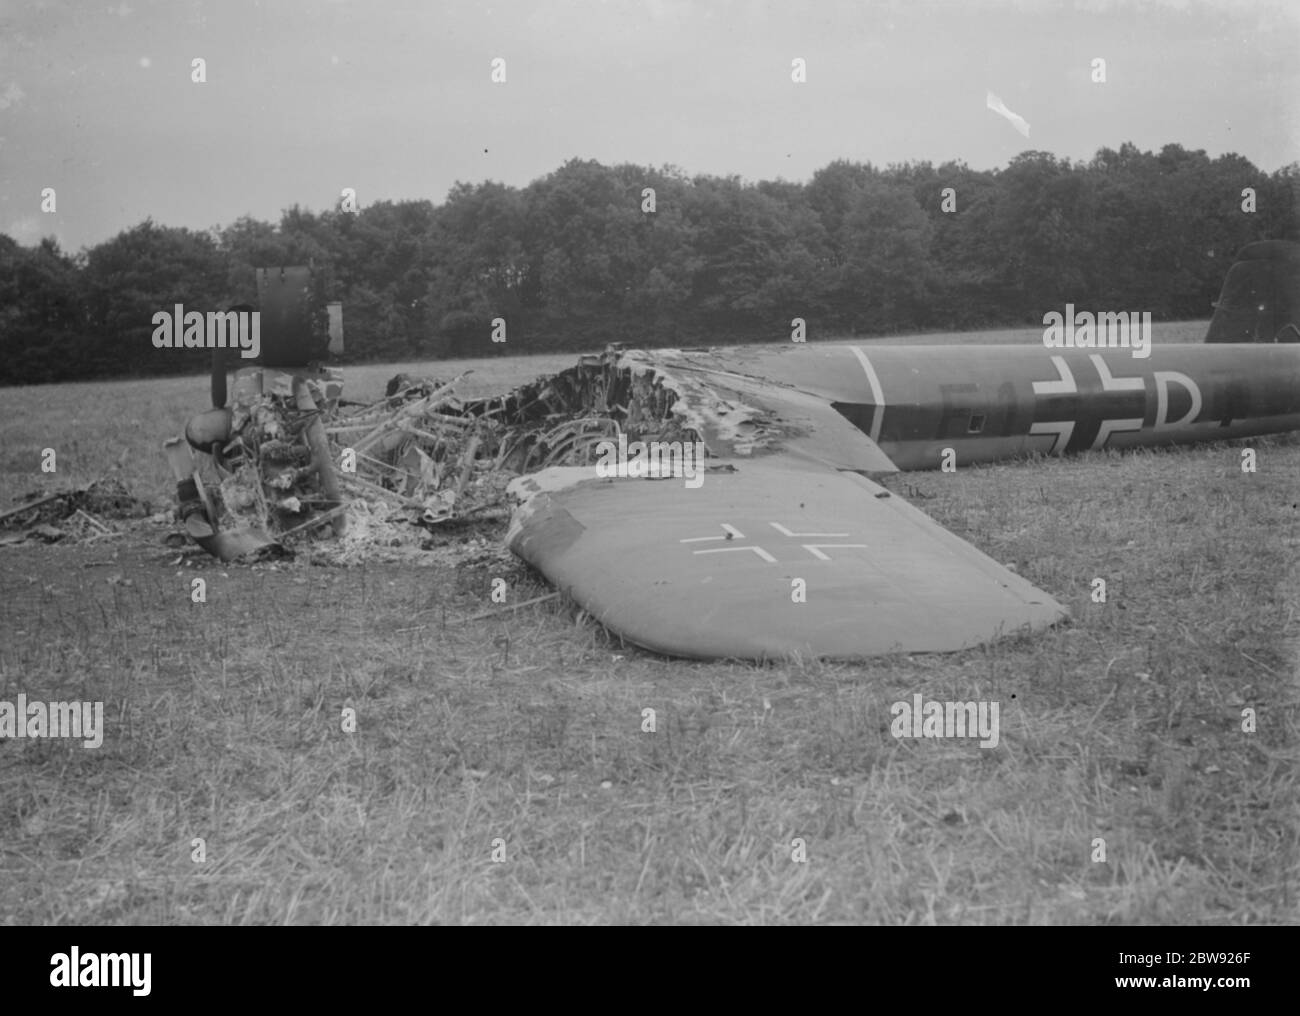 A Dornier Do 17 of 9 Staffel ( Squadron ), Kampfgeschwader 76 ( Bomber Wing 76 ). The bomber was shot down by Hawker Hurricane fighter aircraft of No. 111 Squadron RAF . It crash landed near RAF Biggin Hill . On this day the Luftwaffe began an all-out effort to severely damage Fighter Command , by bombing their airfields . 18 August 1940 . Stock Photo